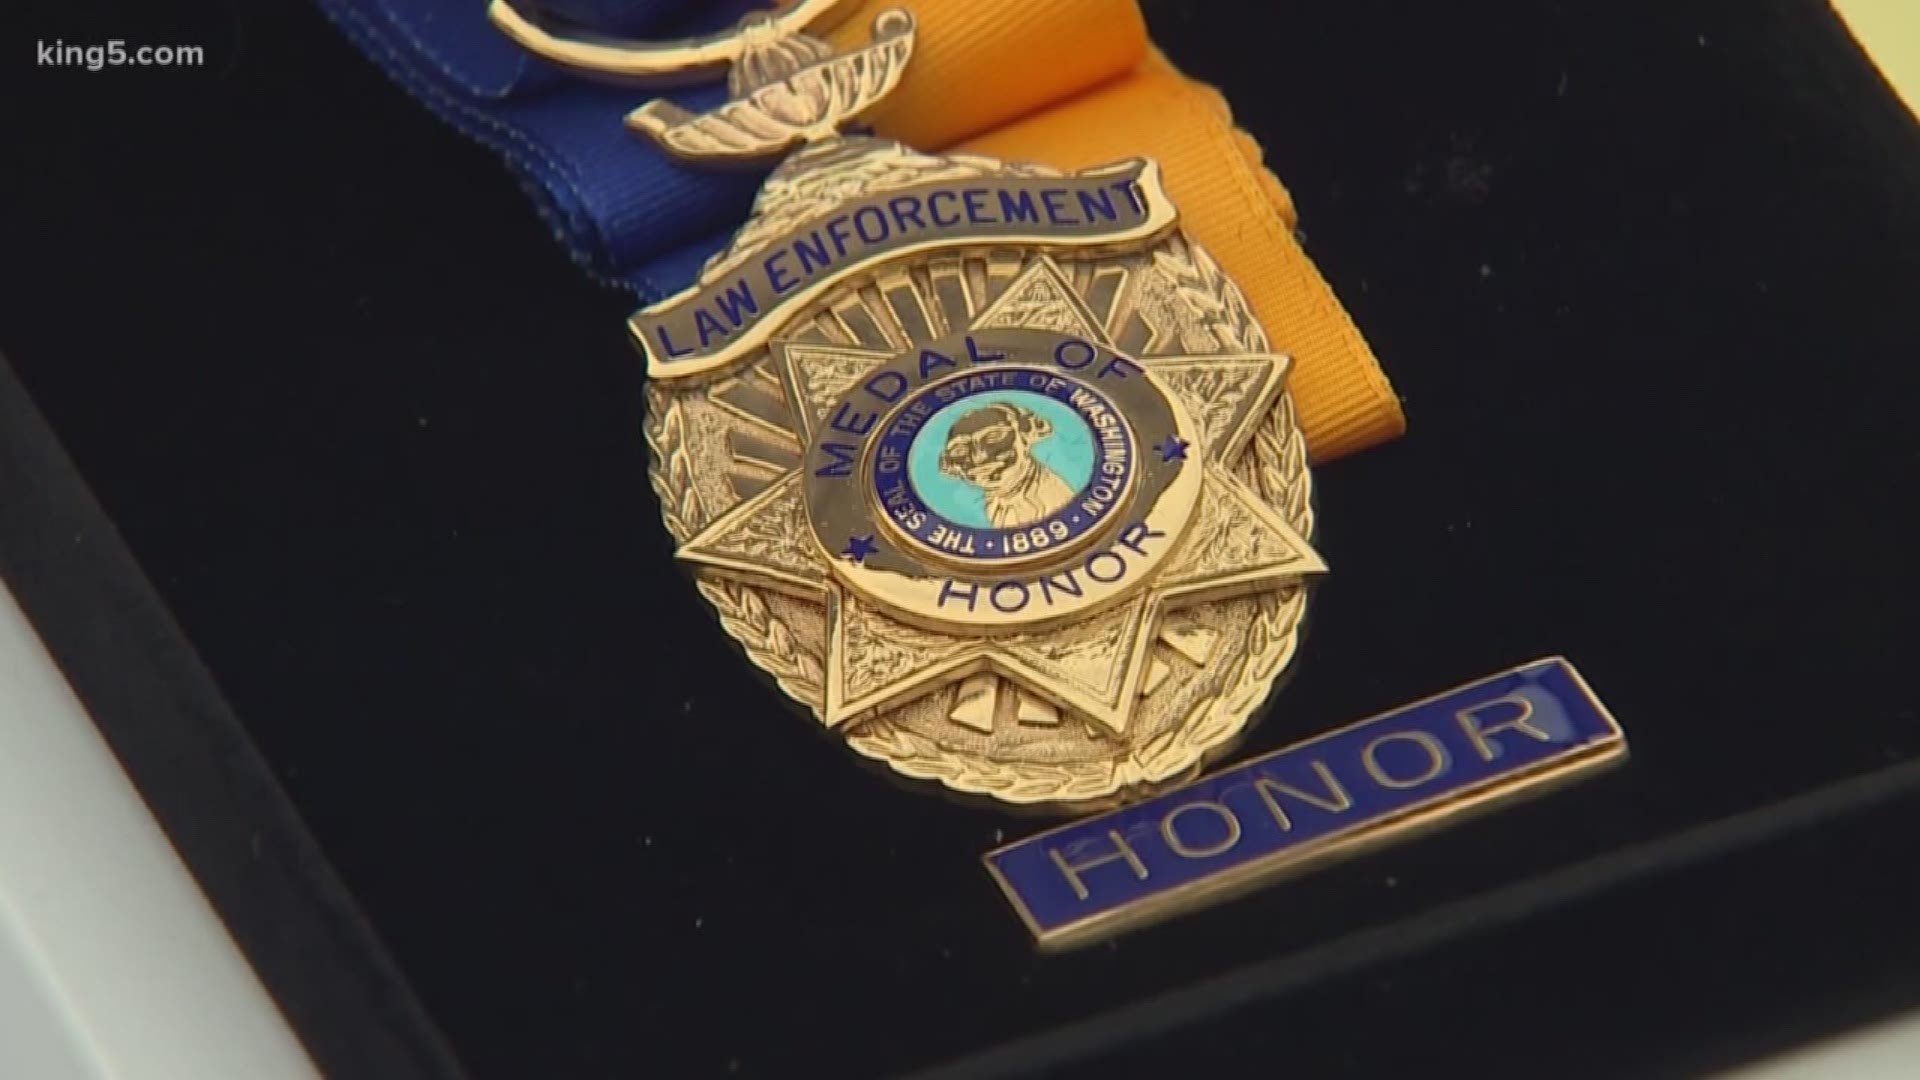 The state is honoring those who lost their lives, or came close, while protecting their communities. KING 5's South Bureau Chief Drew Mikkelsen shows us how their fellow officers make sure their actions are not forgotten.